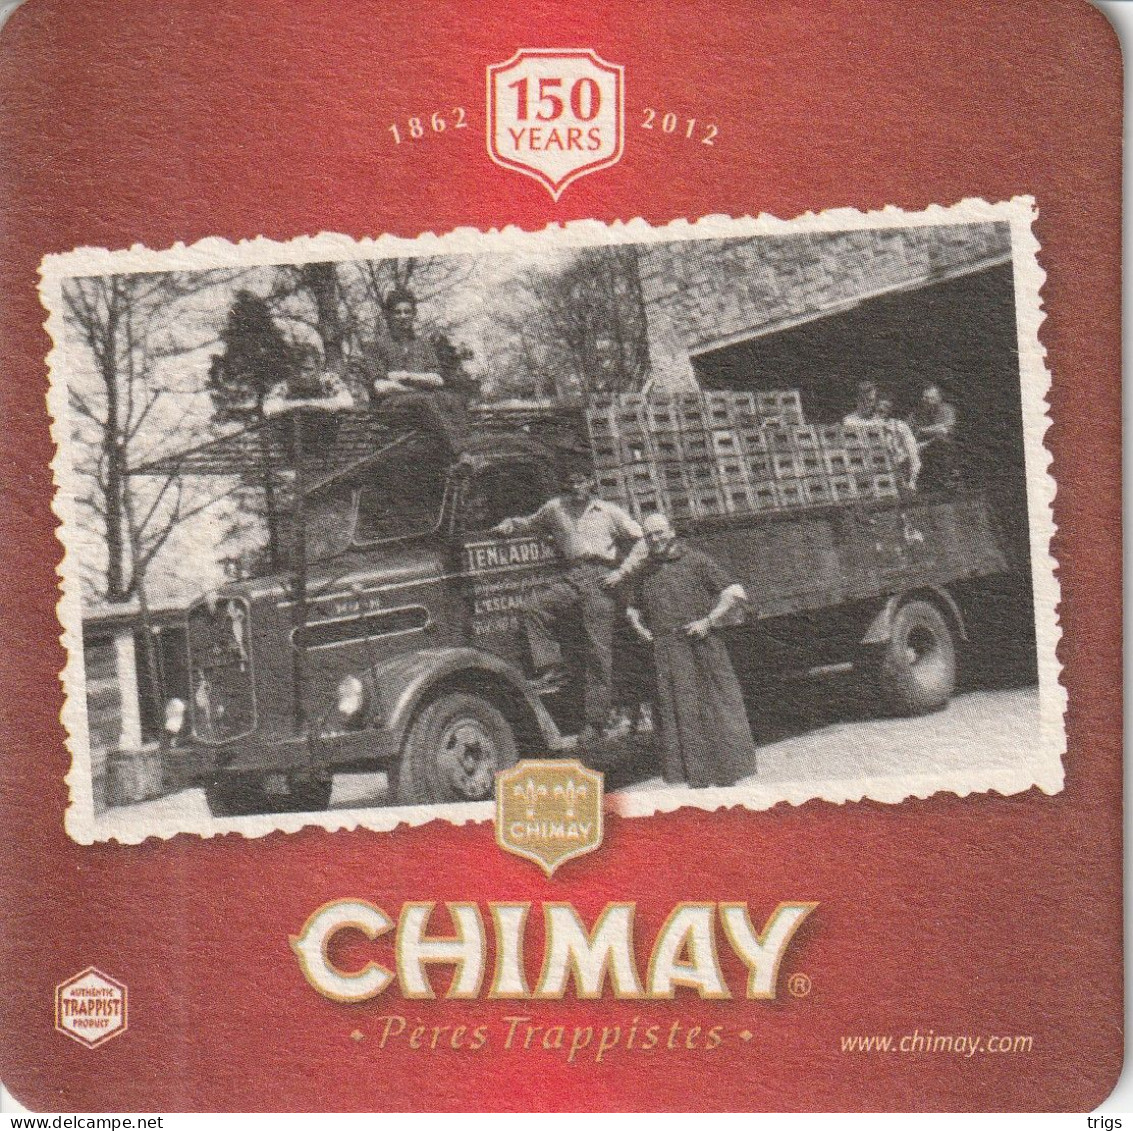 Chimay - Sotto-boccale